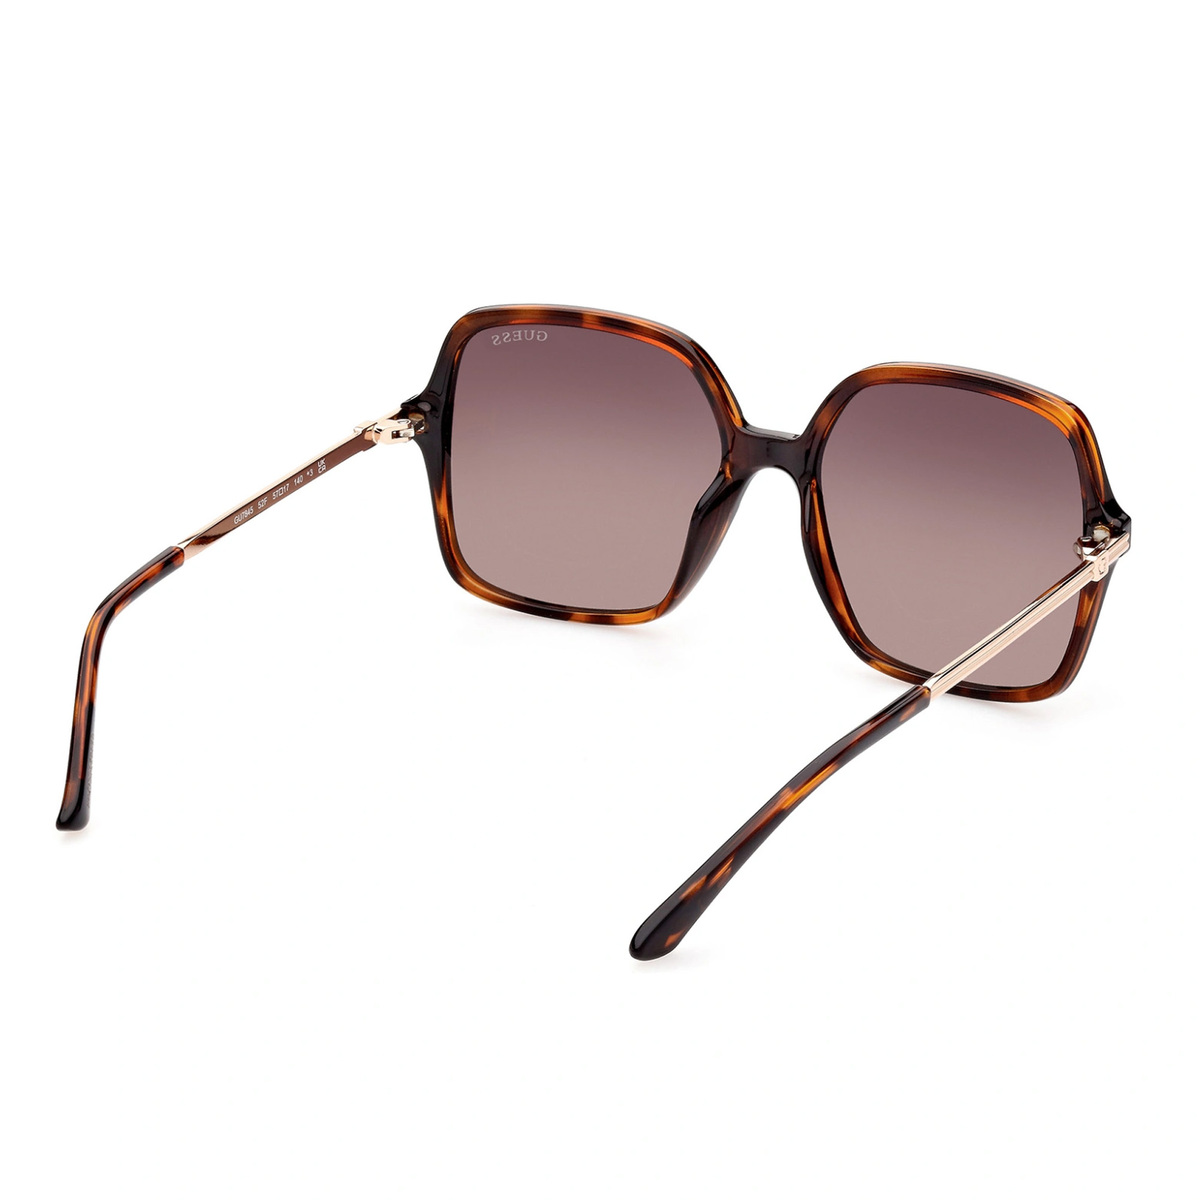 Guess Women's Square Sunglasses, Gradiant Brown, 784552F57